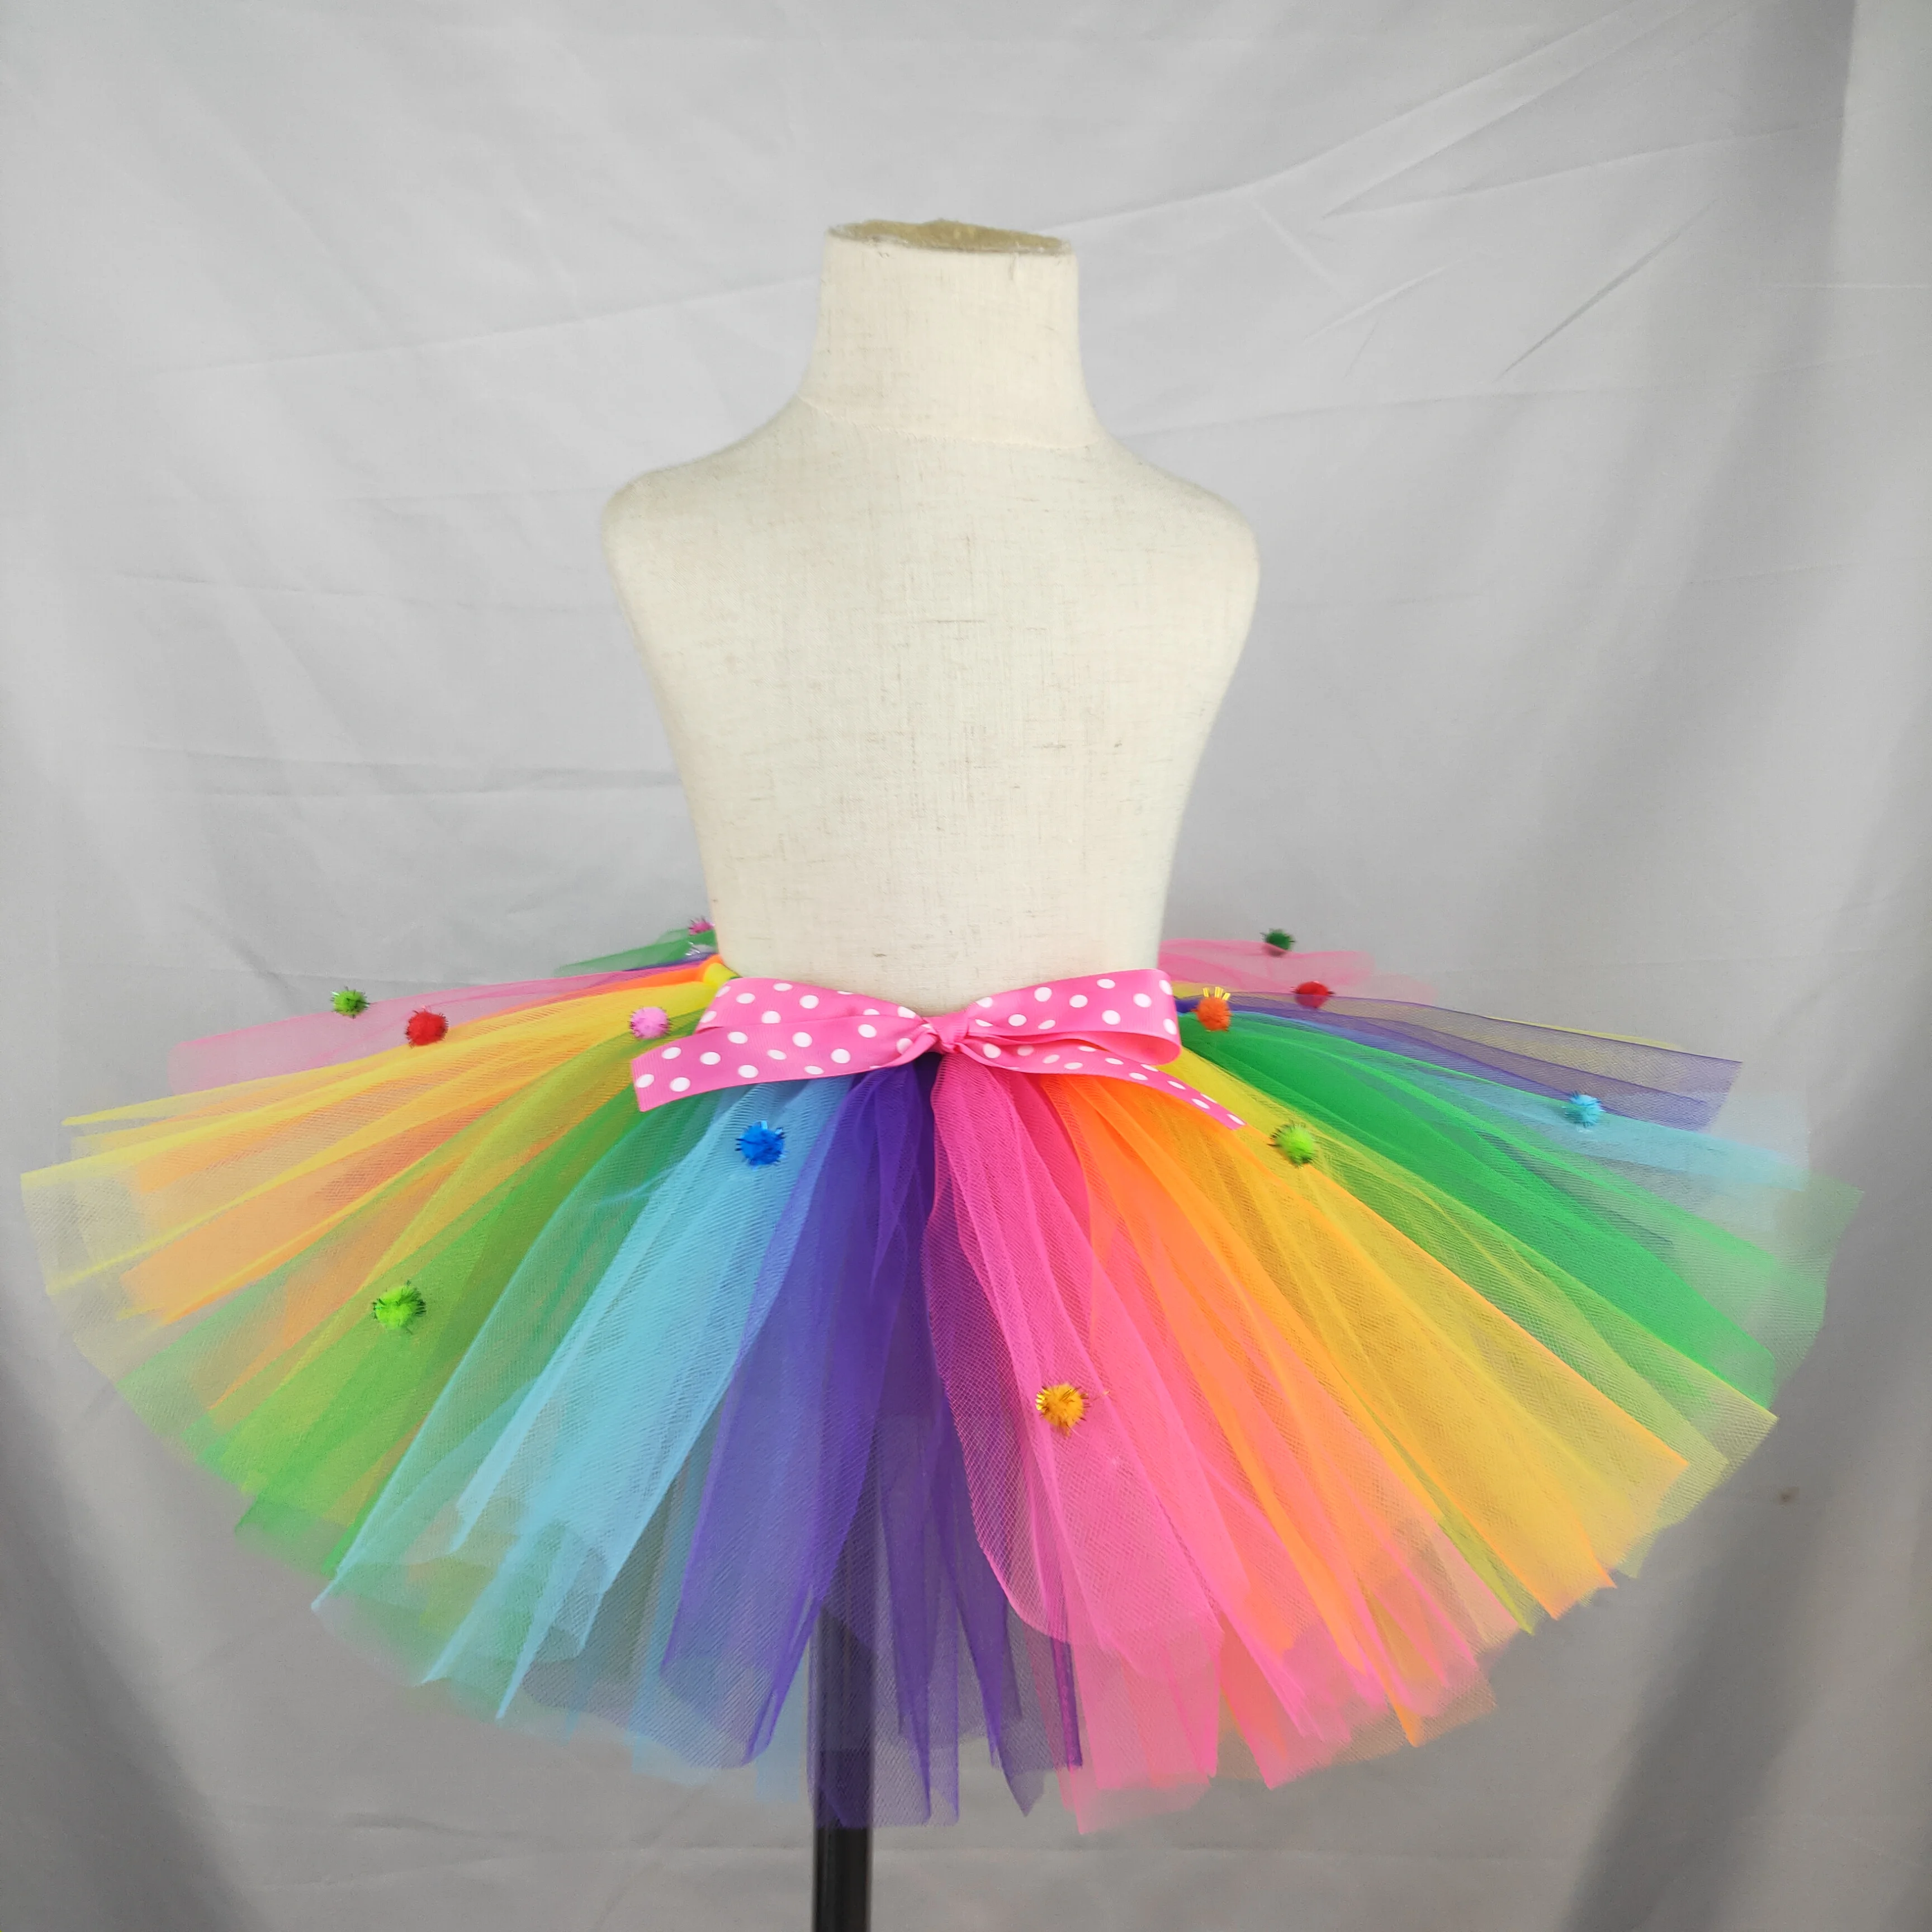 

Rainbow Tutu Skirts Baby Girls Tulle Skirts Ballet Dance Pettiskirt Tutus with Polka Dots Bow and Set Kids Party Skirts